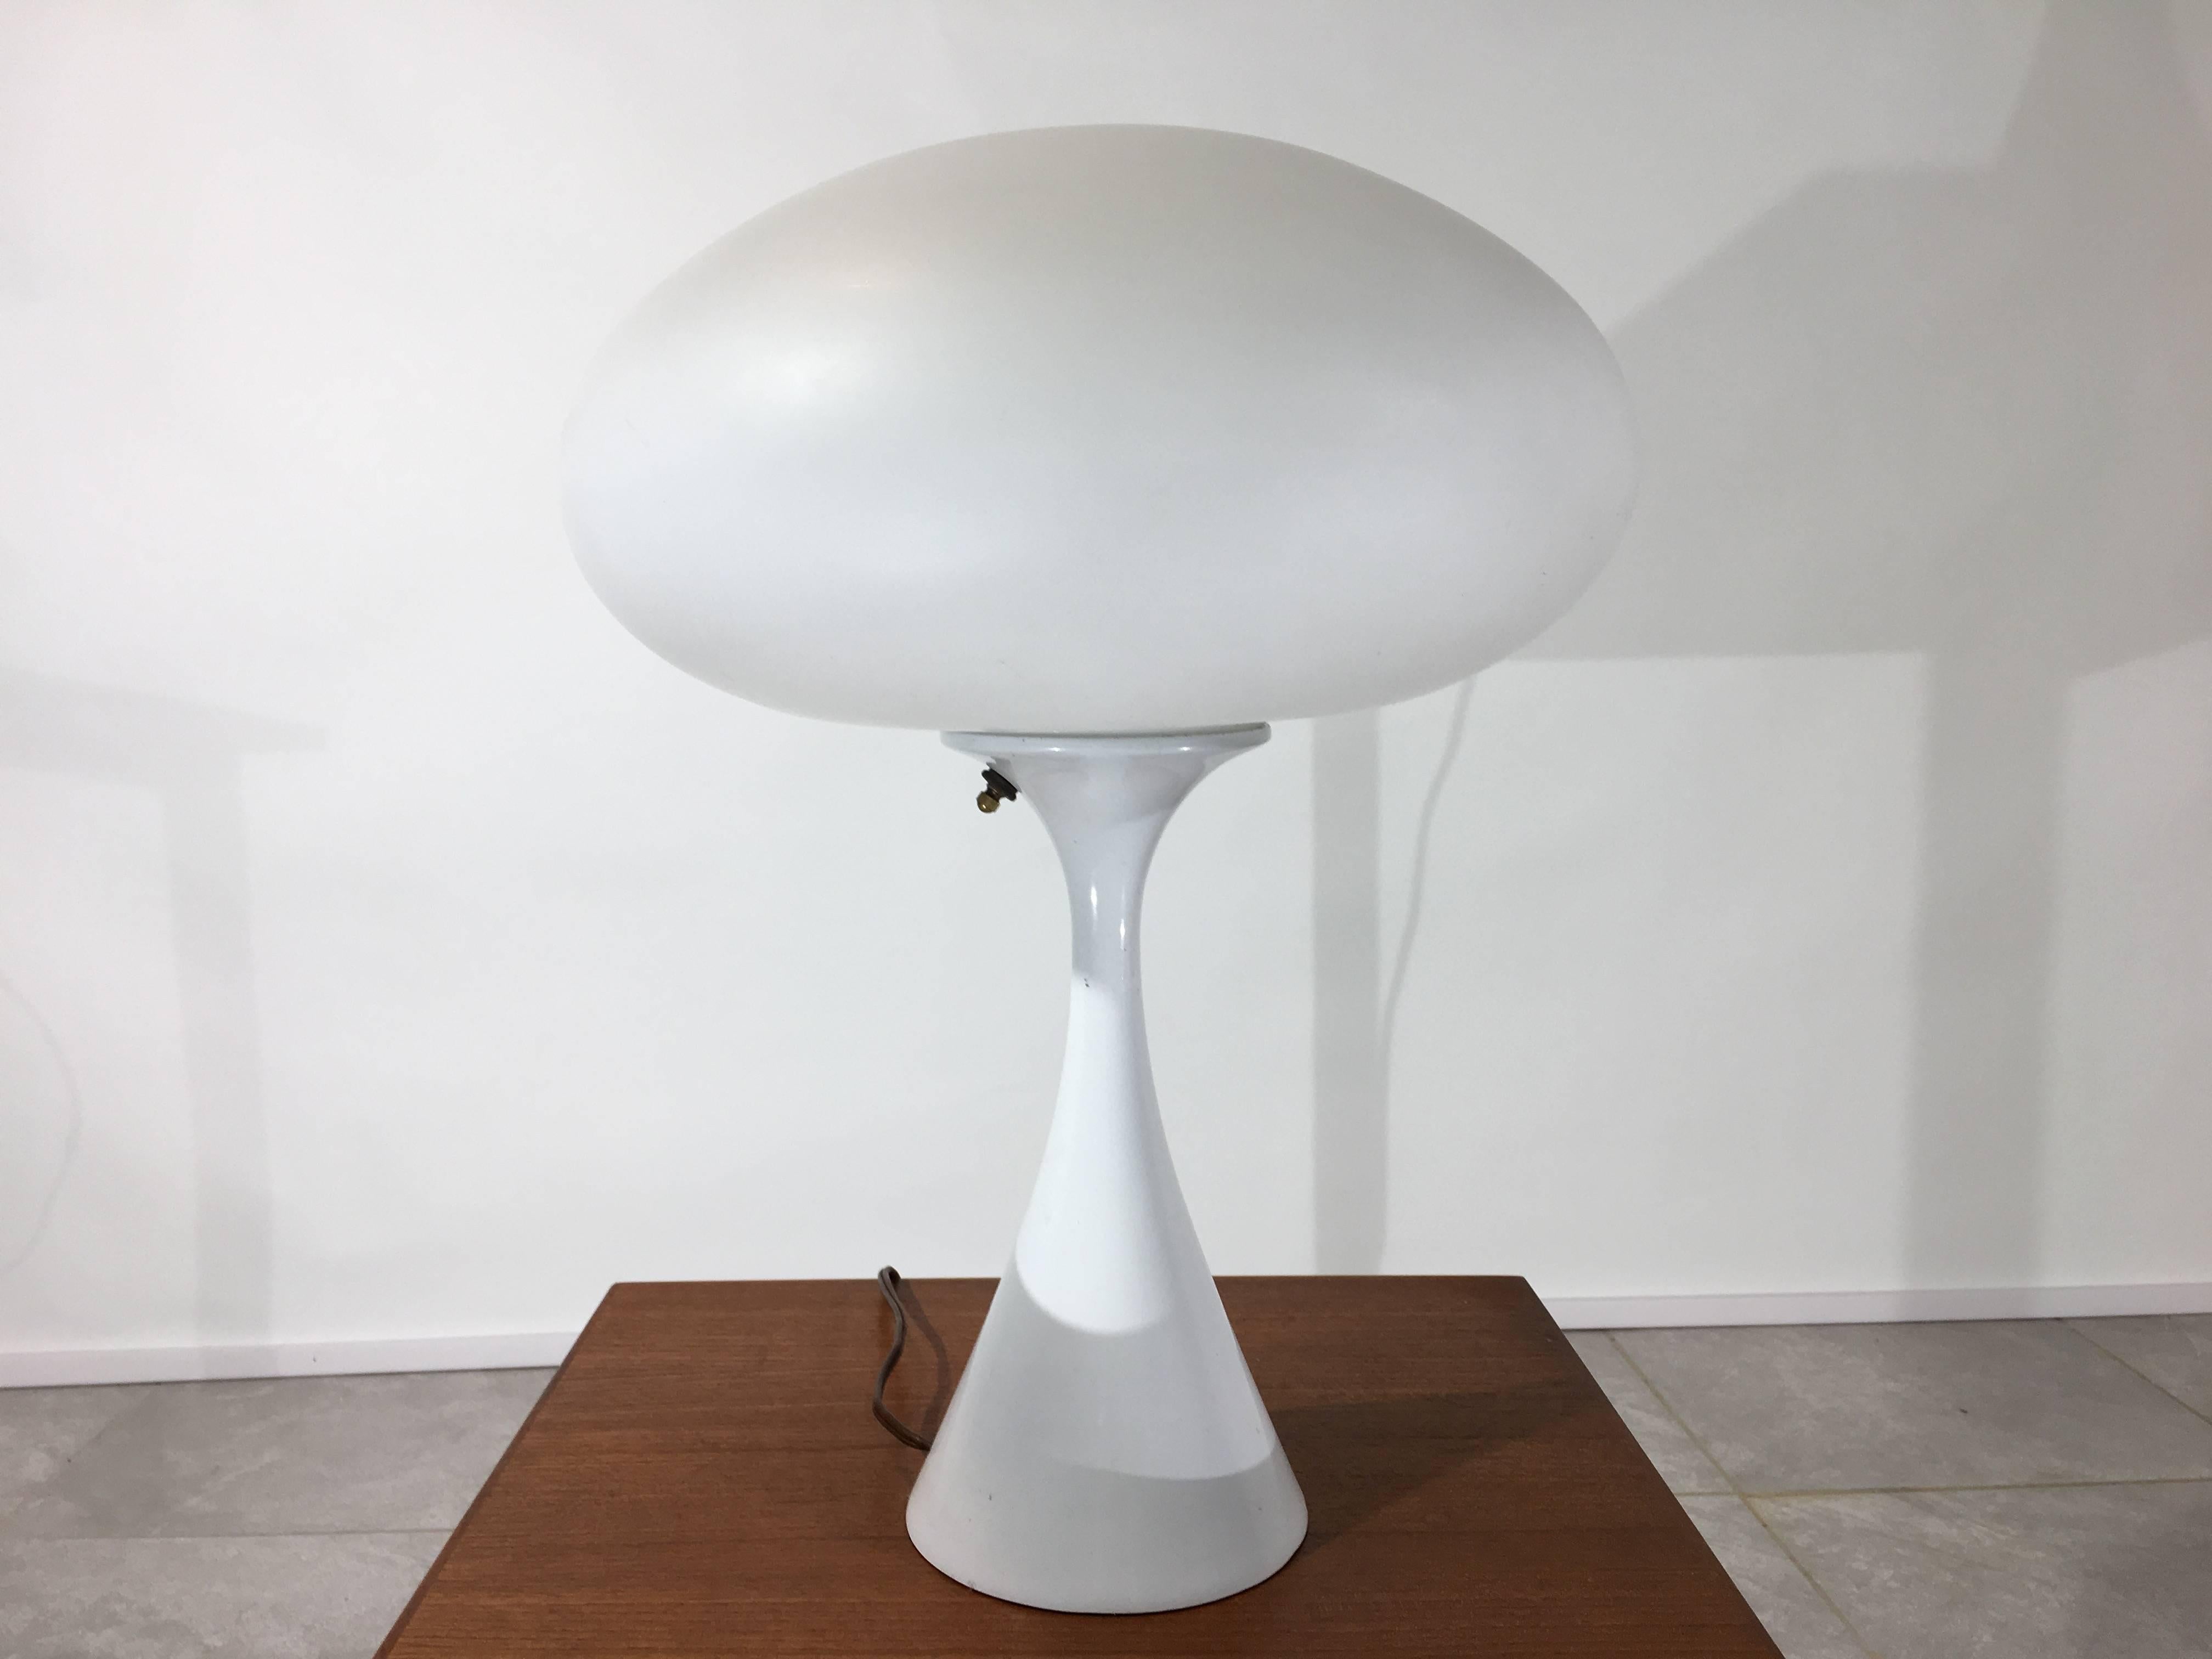 A beautiful, early edition Bill Curry Laurel Mushroom lamp having the original white base and globe. 
Features a three-way switch for three stages of brightness.